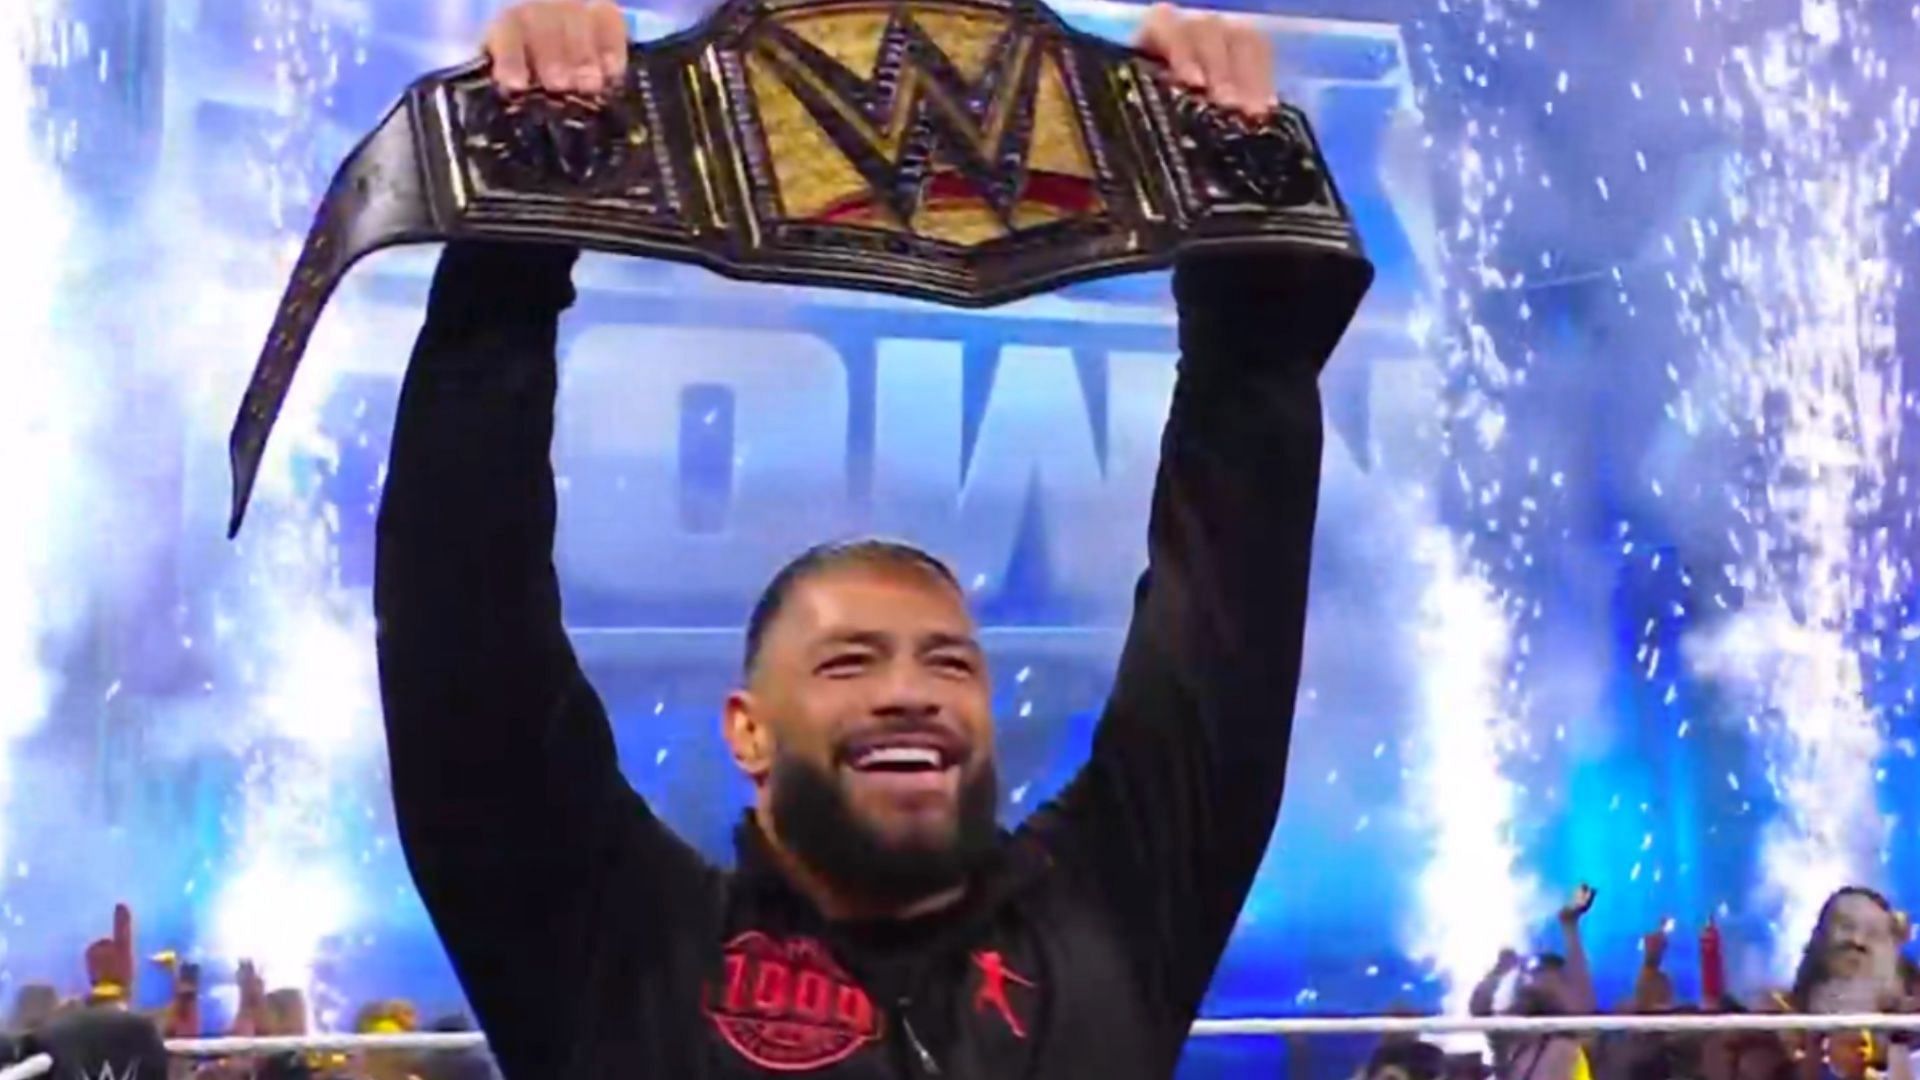 Roman Reigns was awarded the new undisputed title last week on WWE SmackDown.